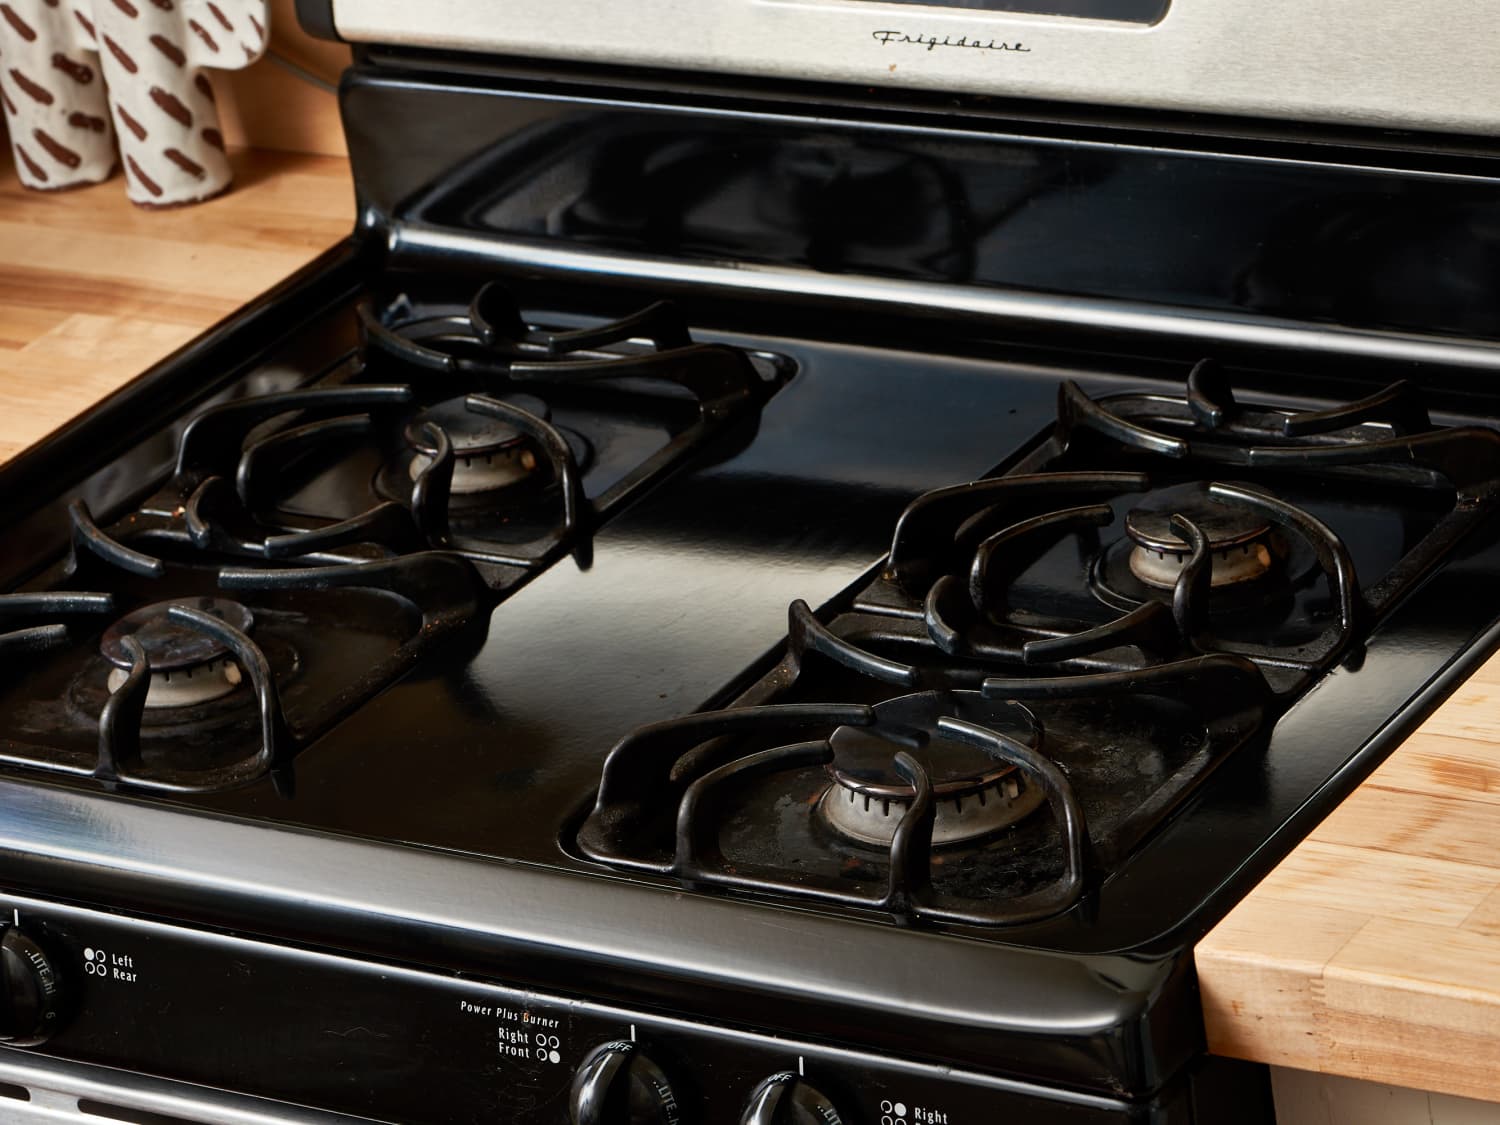 How To Get Stains Off A Black Stove Top